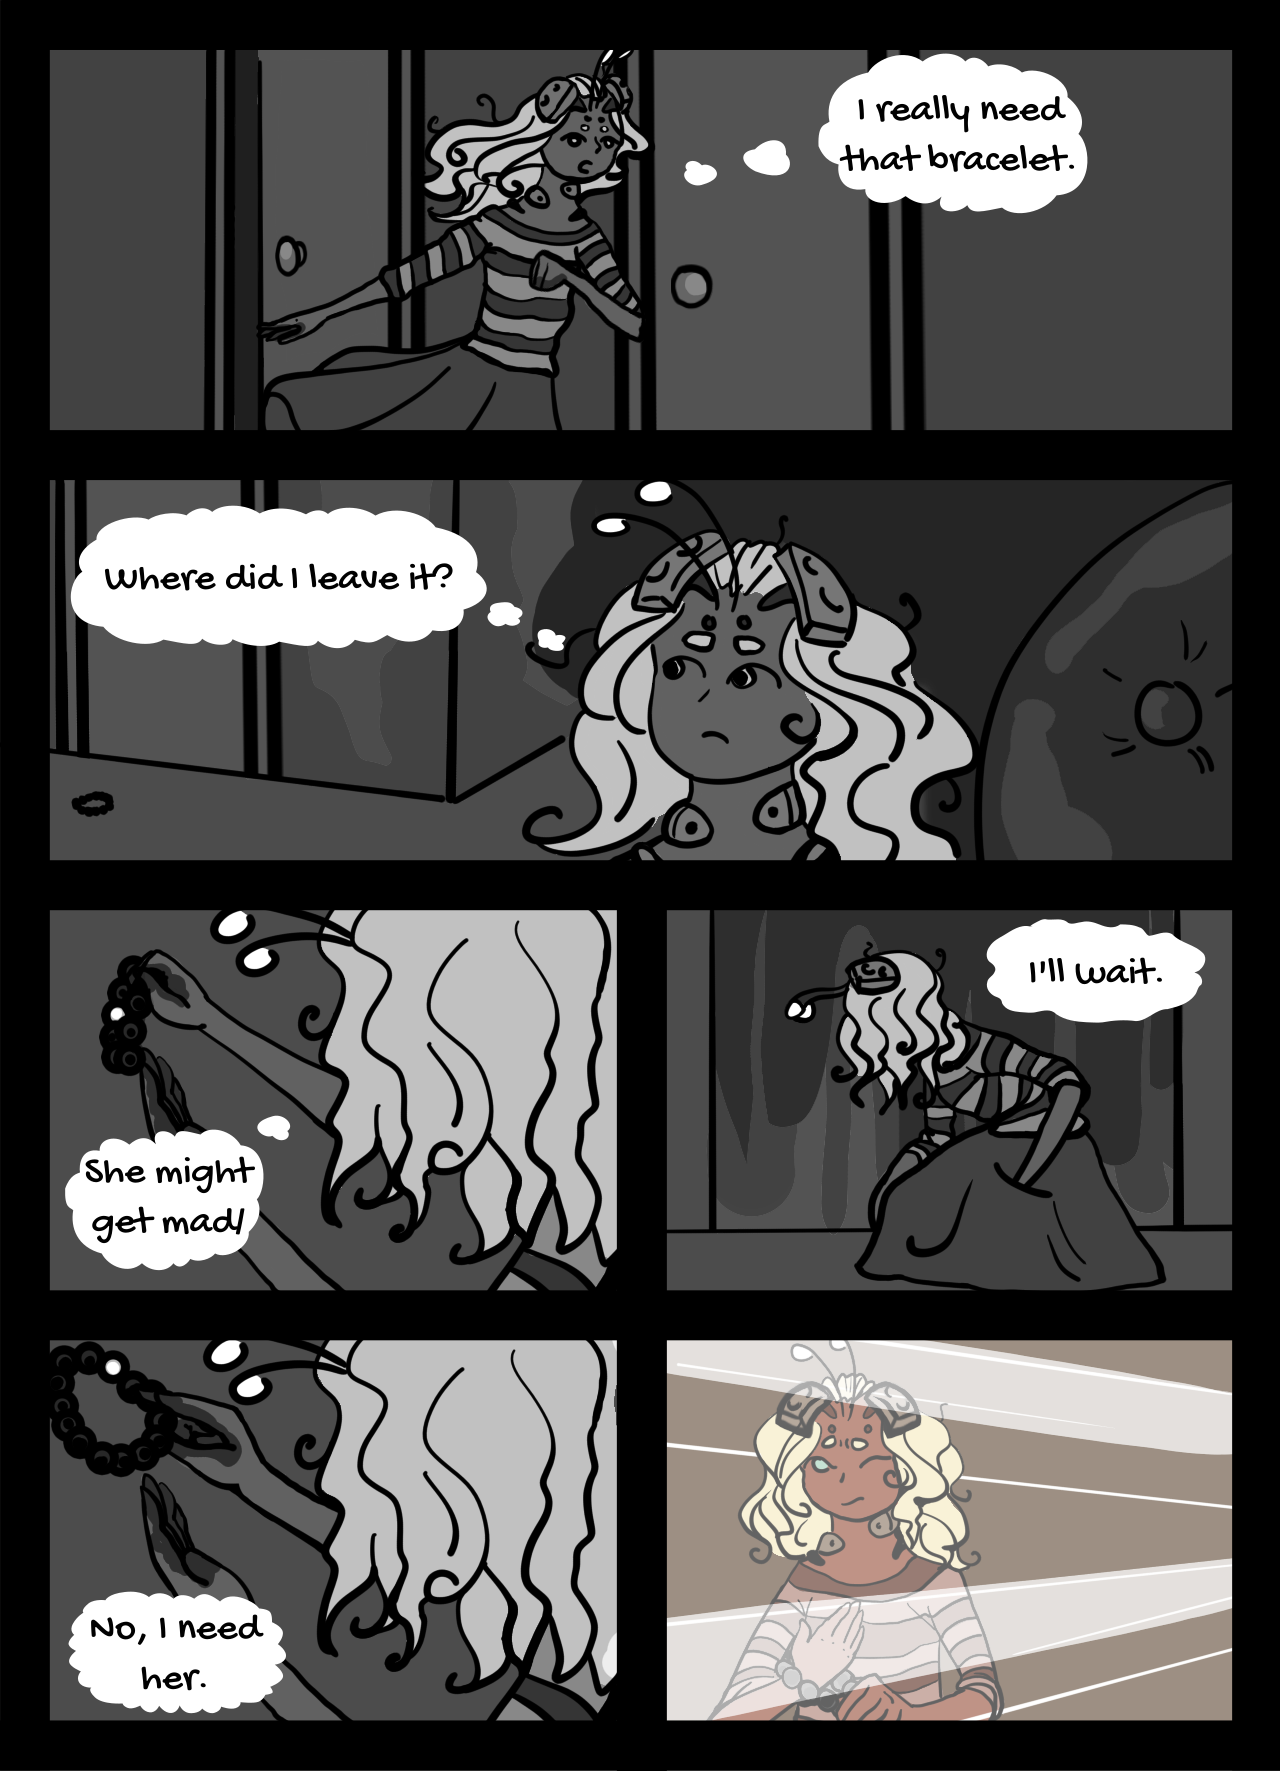 Page 33: An alien girl scours her house for a bracelet, then hesitates before wearing it. Her friend might get mad for being called again. The girl puts the bracelet on and light streams into the room.